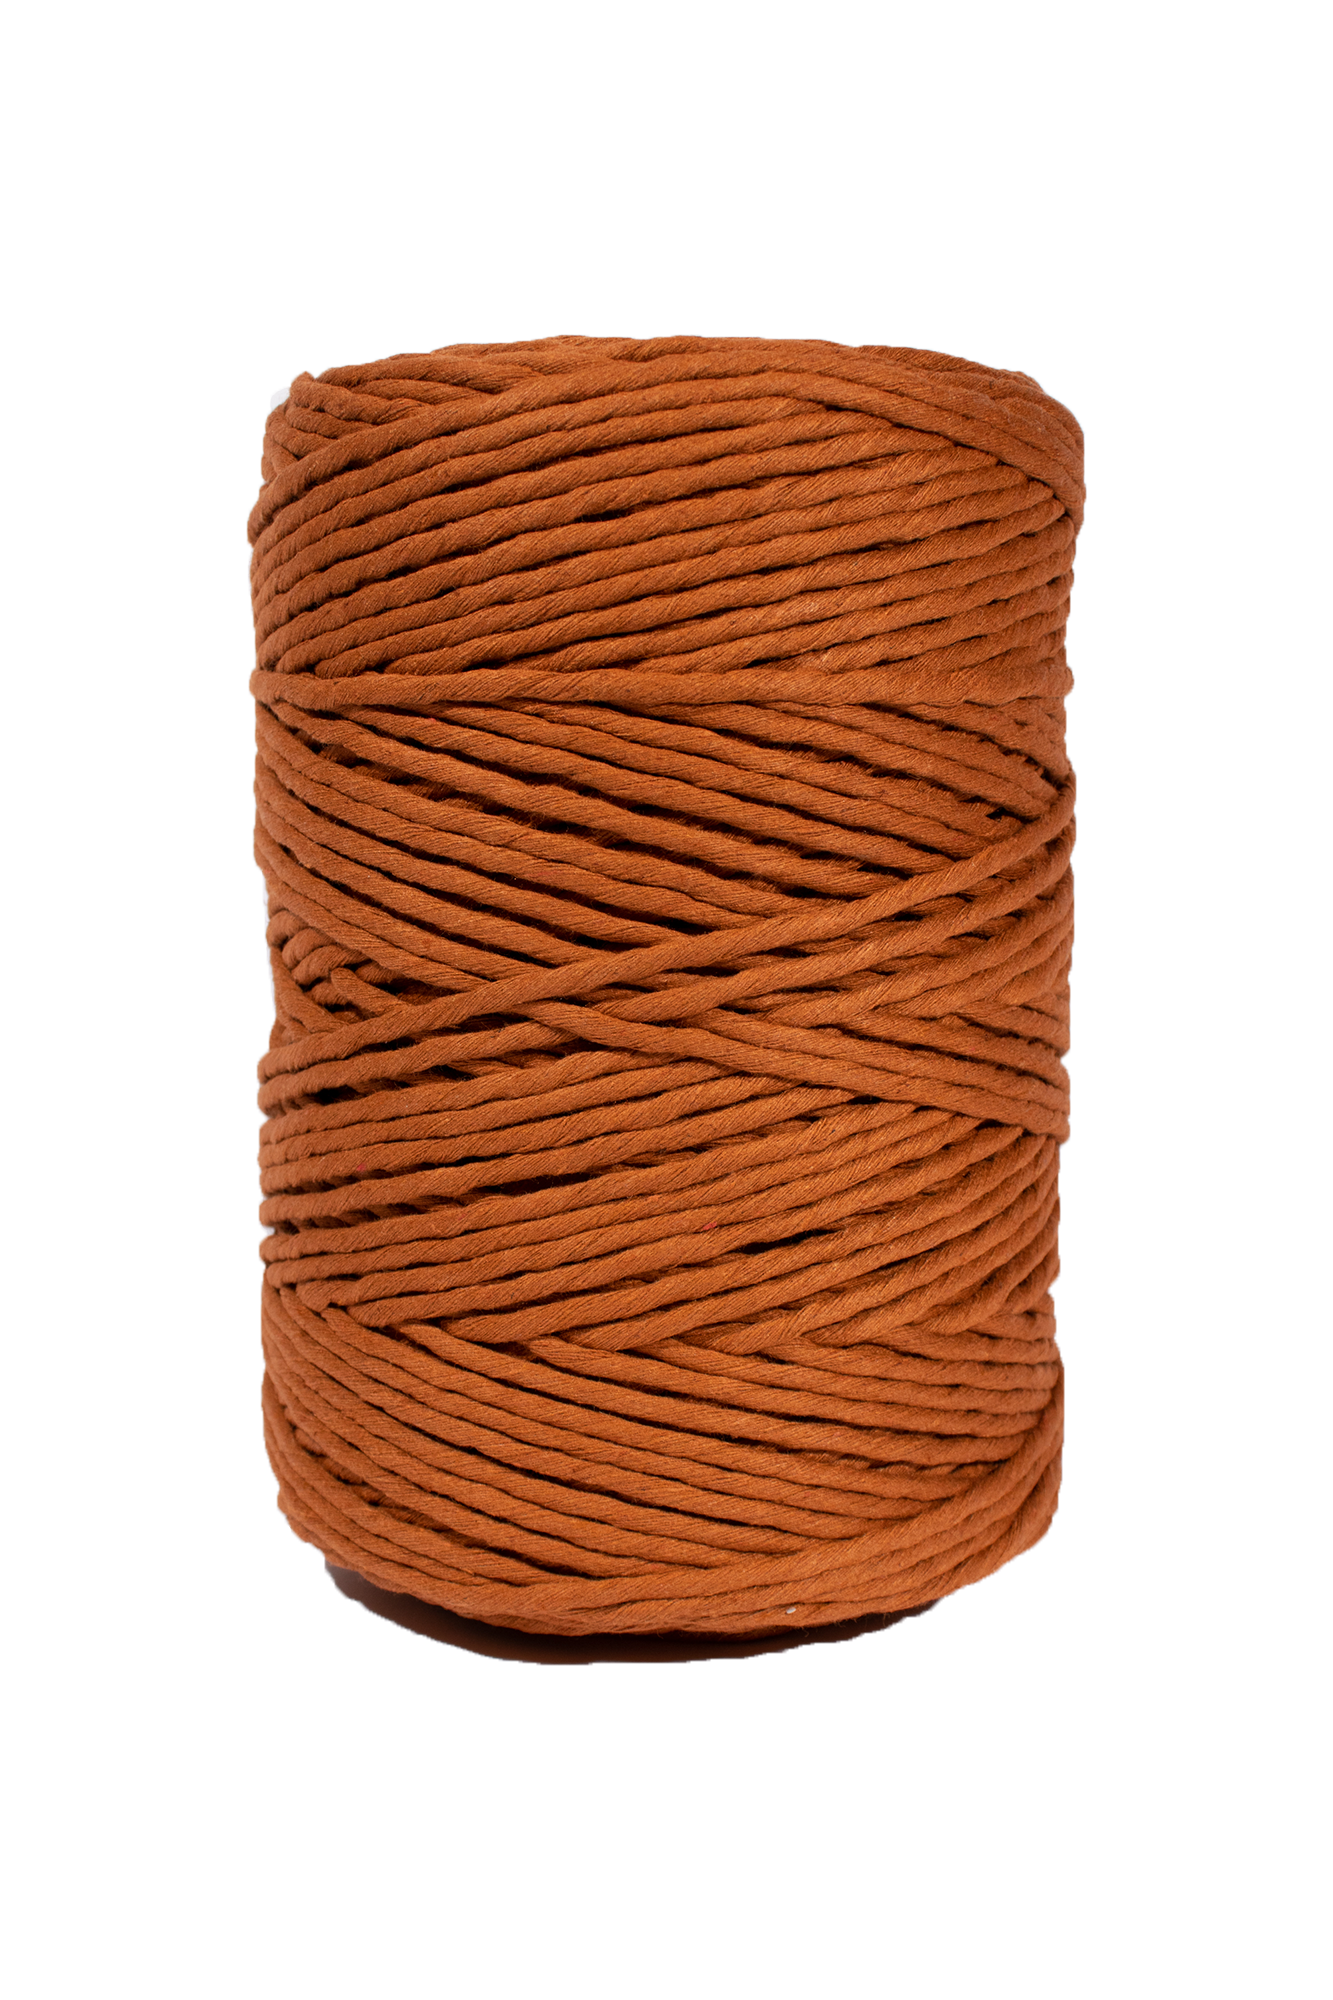 2mm 100% Recycled Cotton Cord - 1000ft Spool